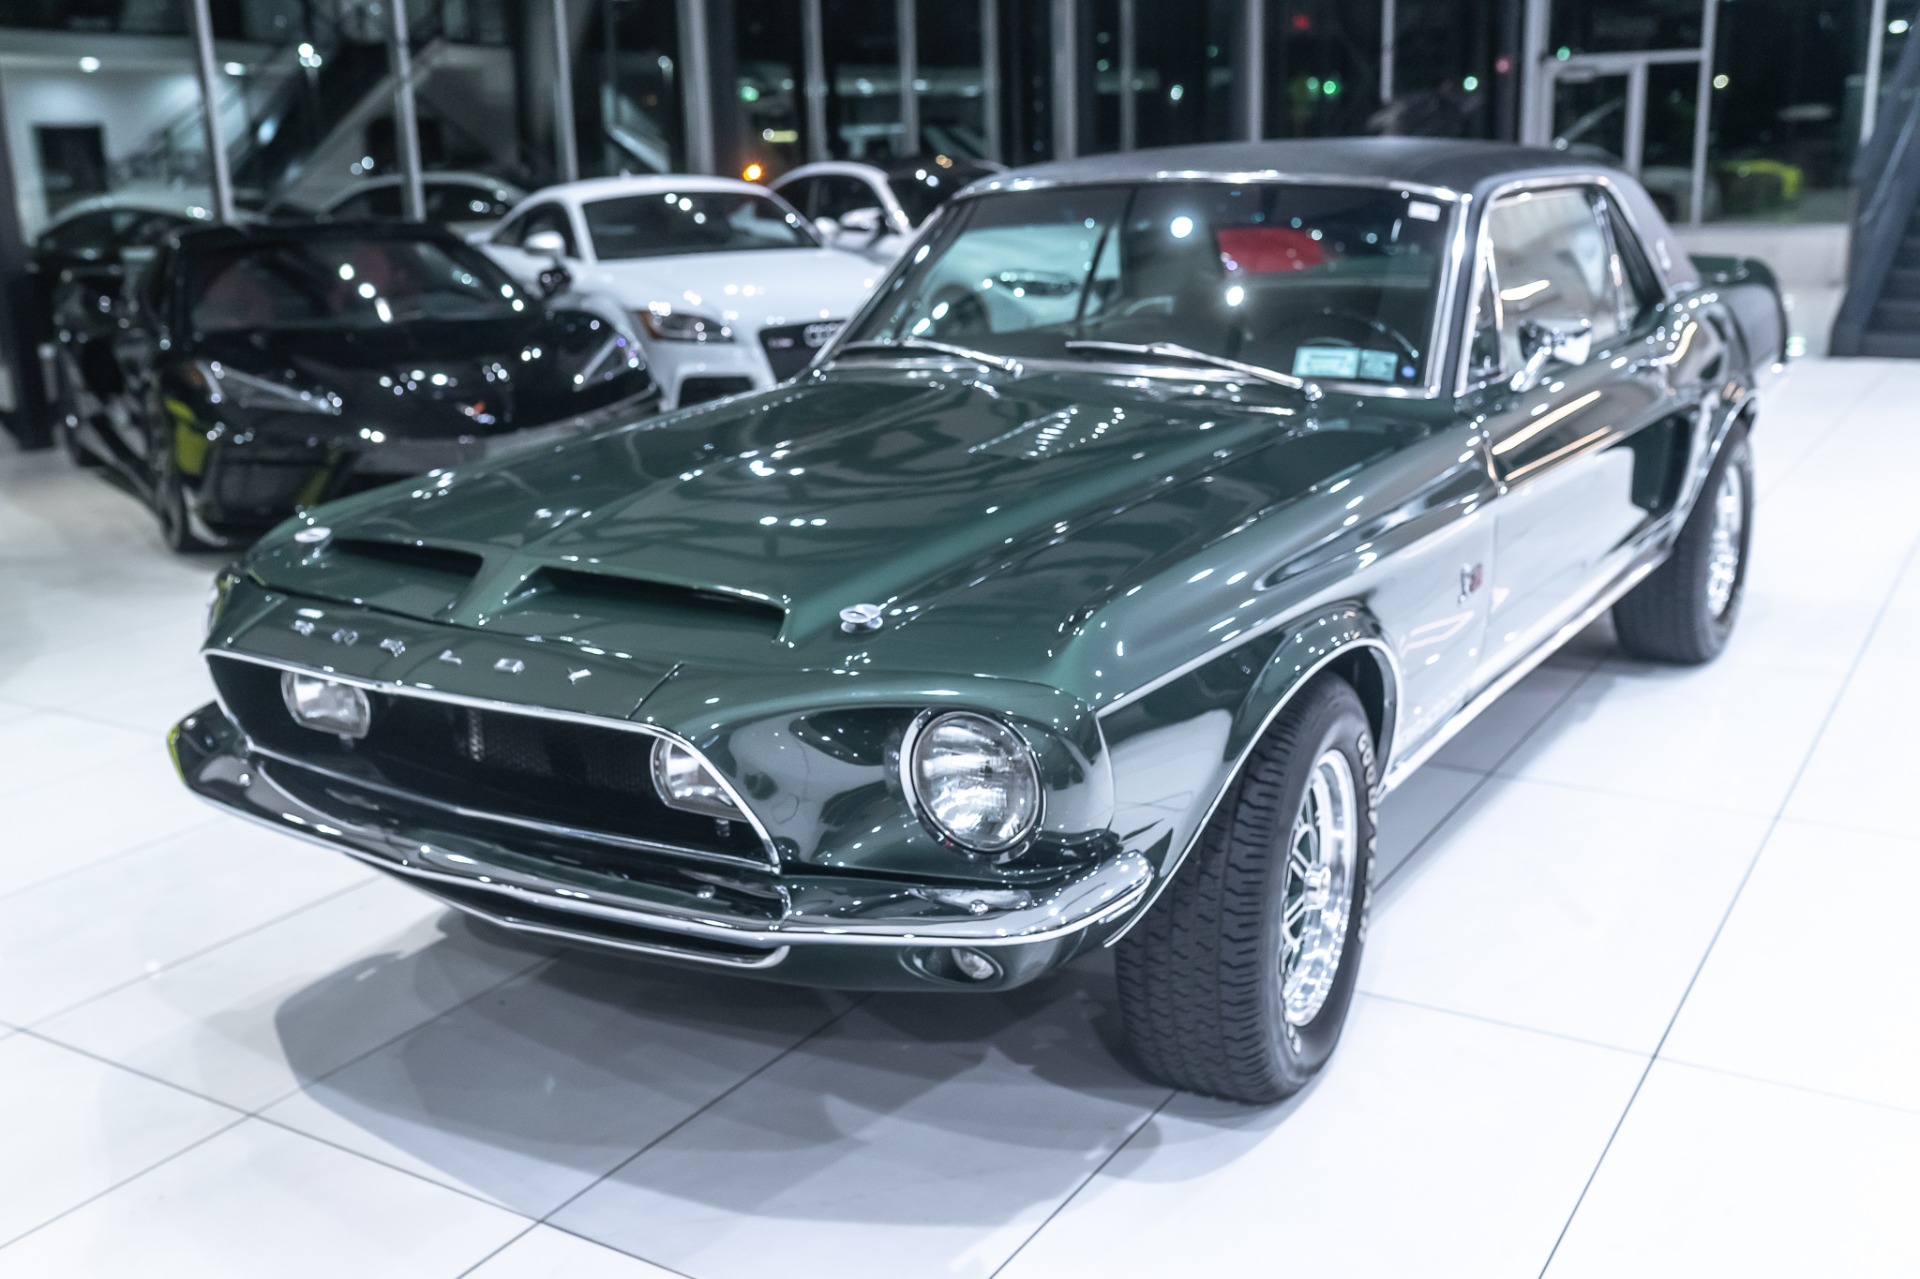 Used-1968-Ford-Shelby-Mustang-EXP-500-CSS-Coupe-GREEN-HORNET-1-OF-1-Ever-Built-By-Carroll-Shelby